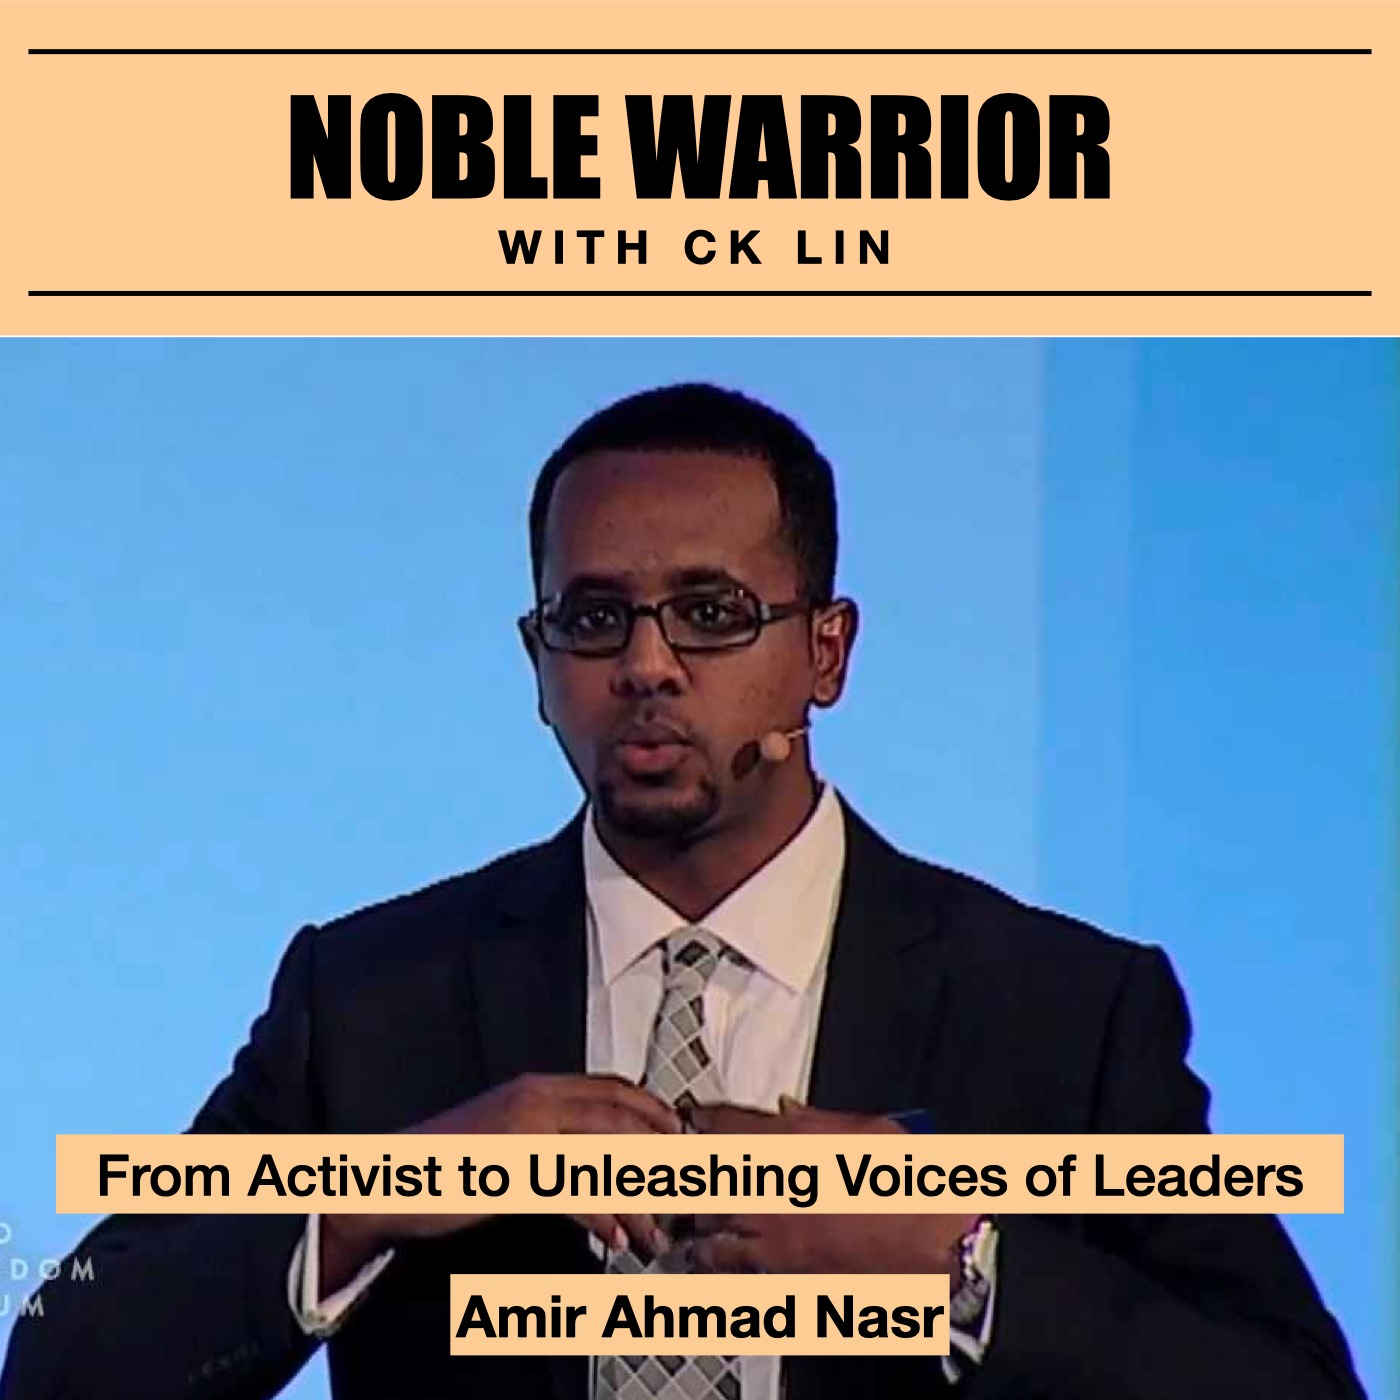 141 Amir Ahmad Nasr: From Activist to Unleashing Voices of Leaders